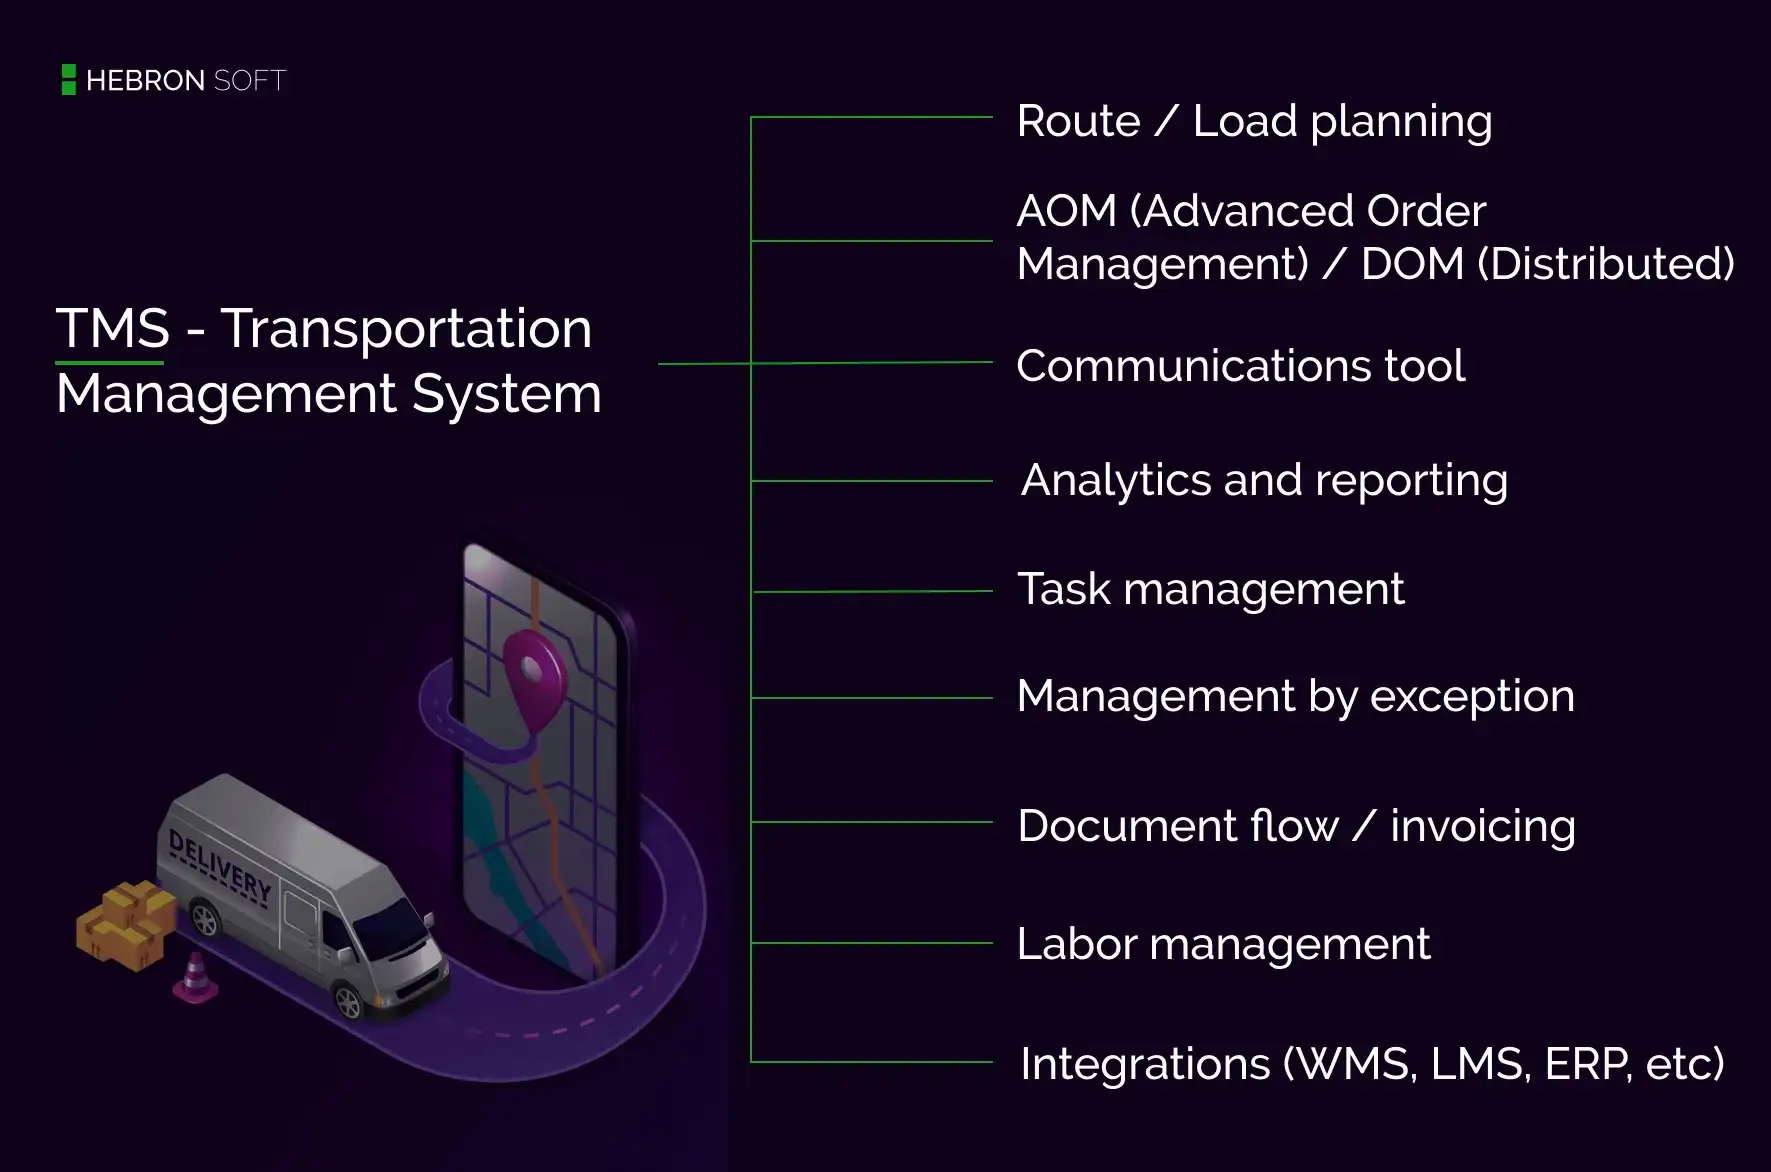 The scheme with information about all opportunities of TMS (Transport Management System)